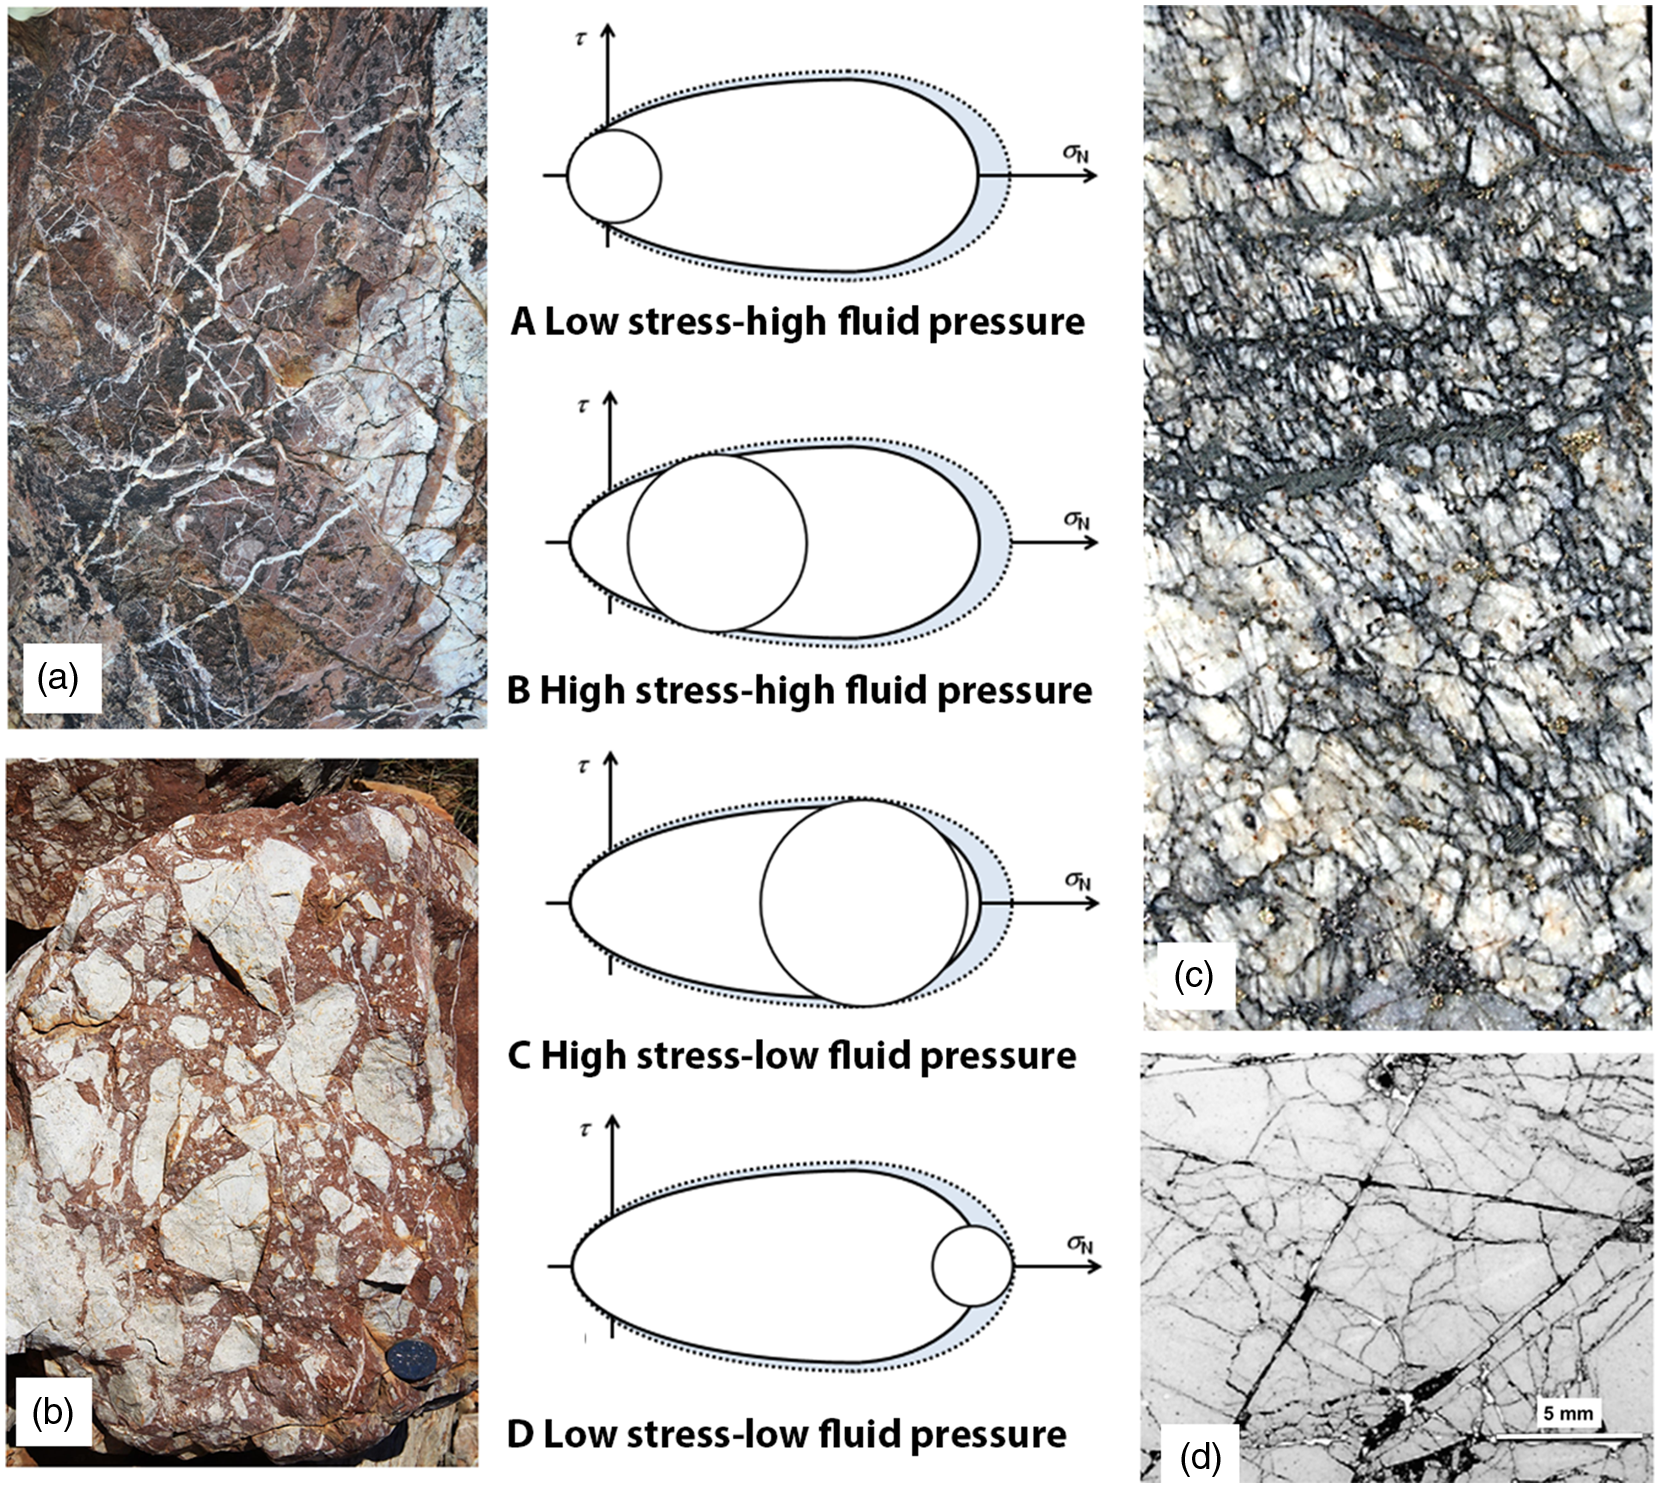 Examples of common failure modes observed in hard brittle rocks